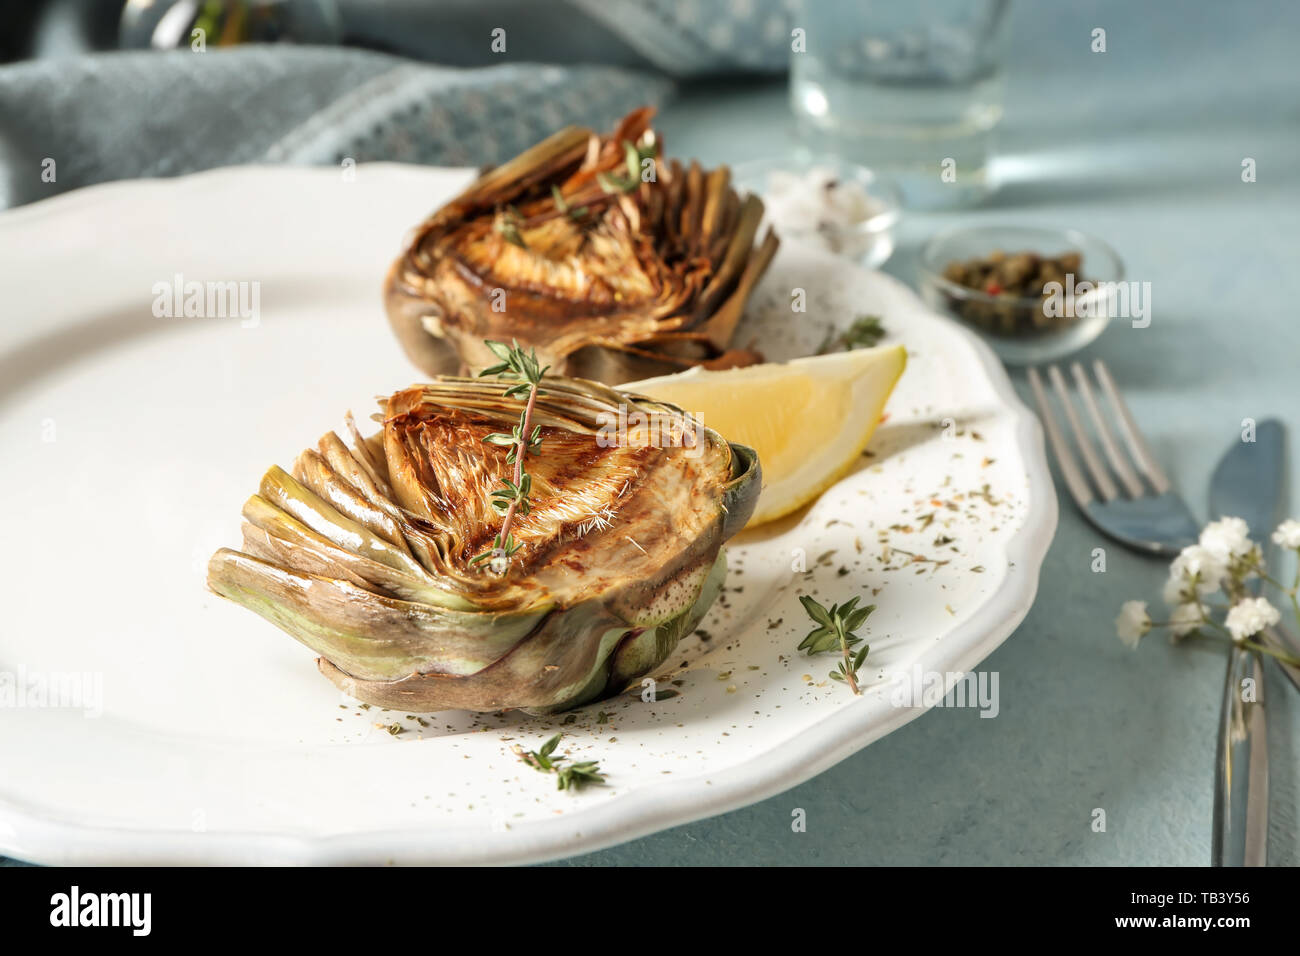 Plate with tasty grilled artichoke on table Stock Photo